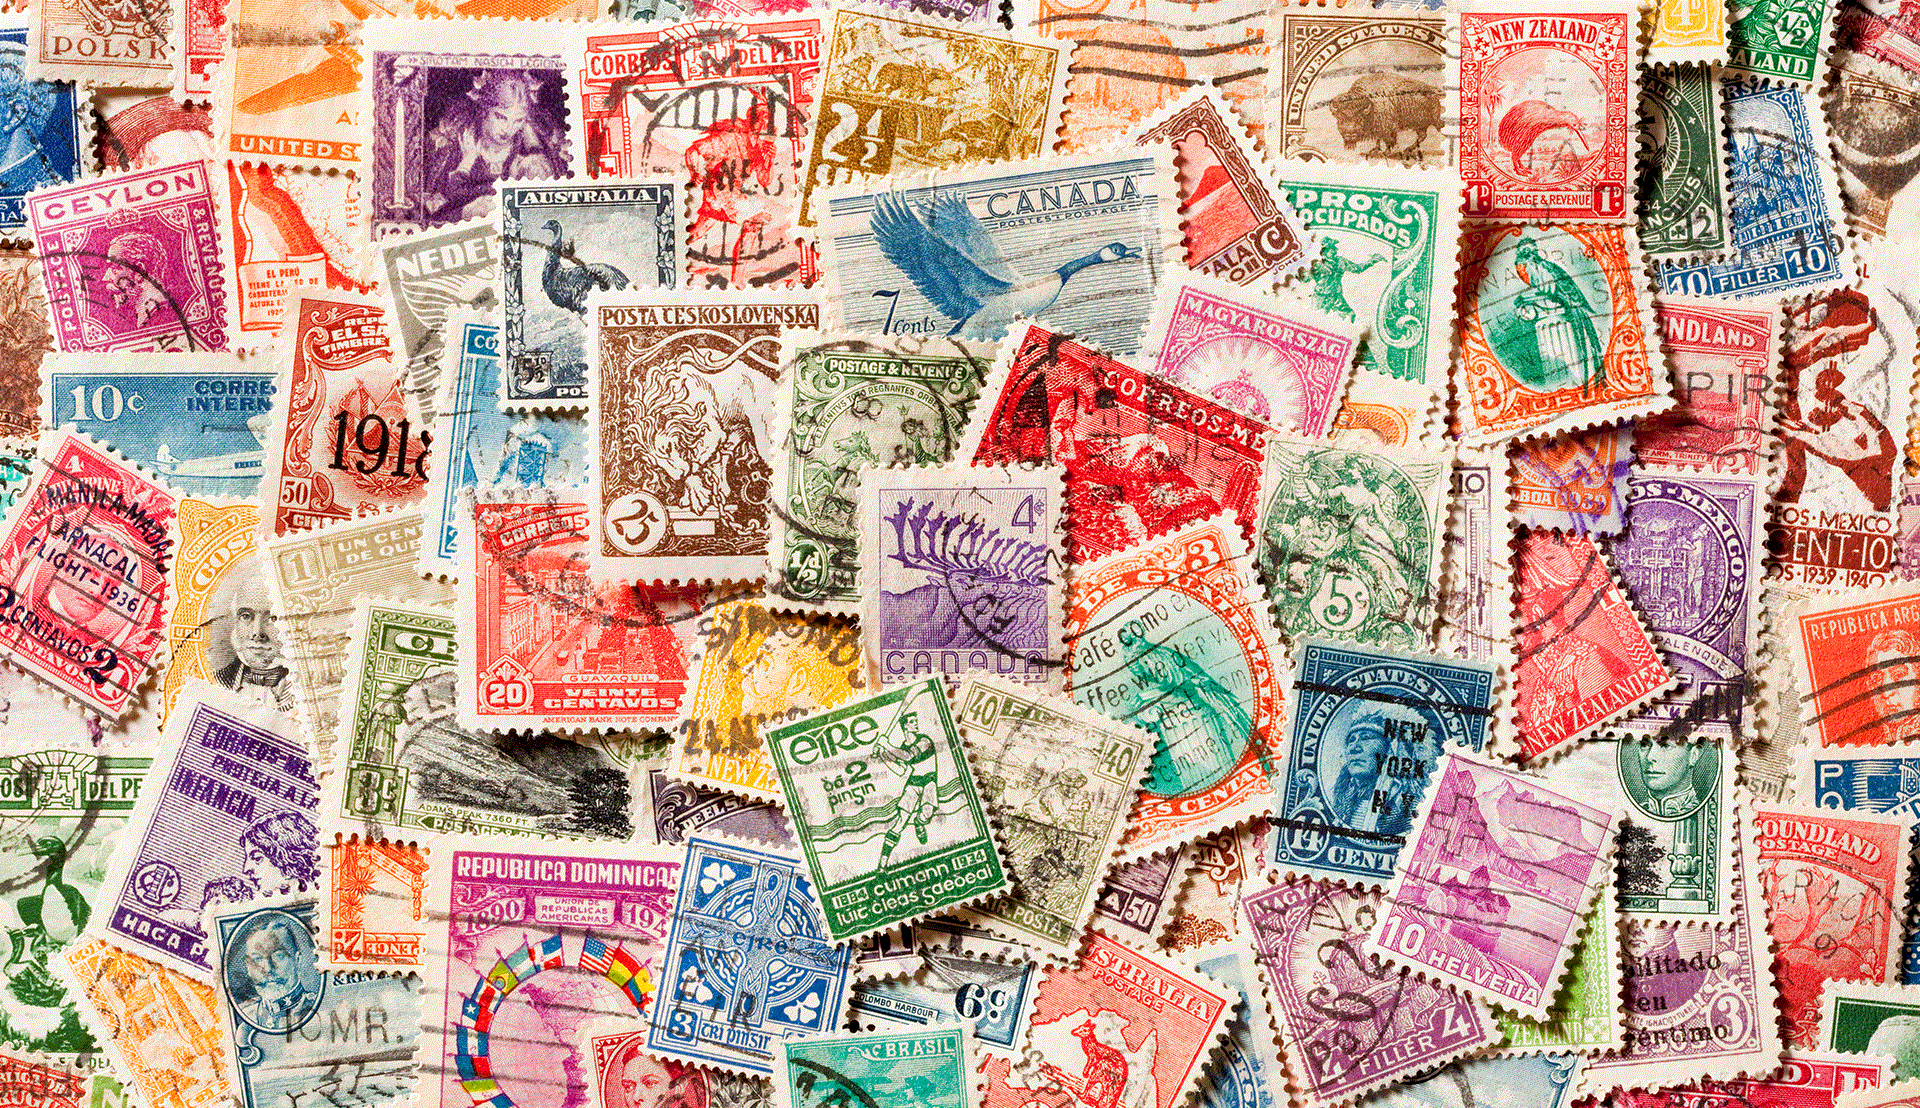 Rutgers Global - From Delegation to Education, assortment of international stamps